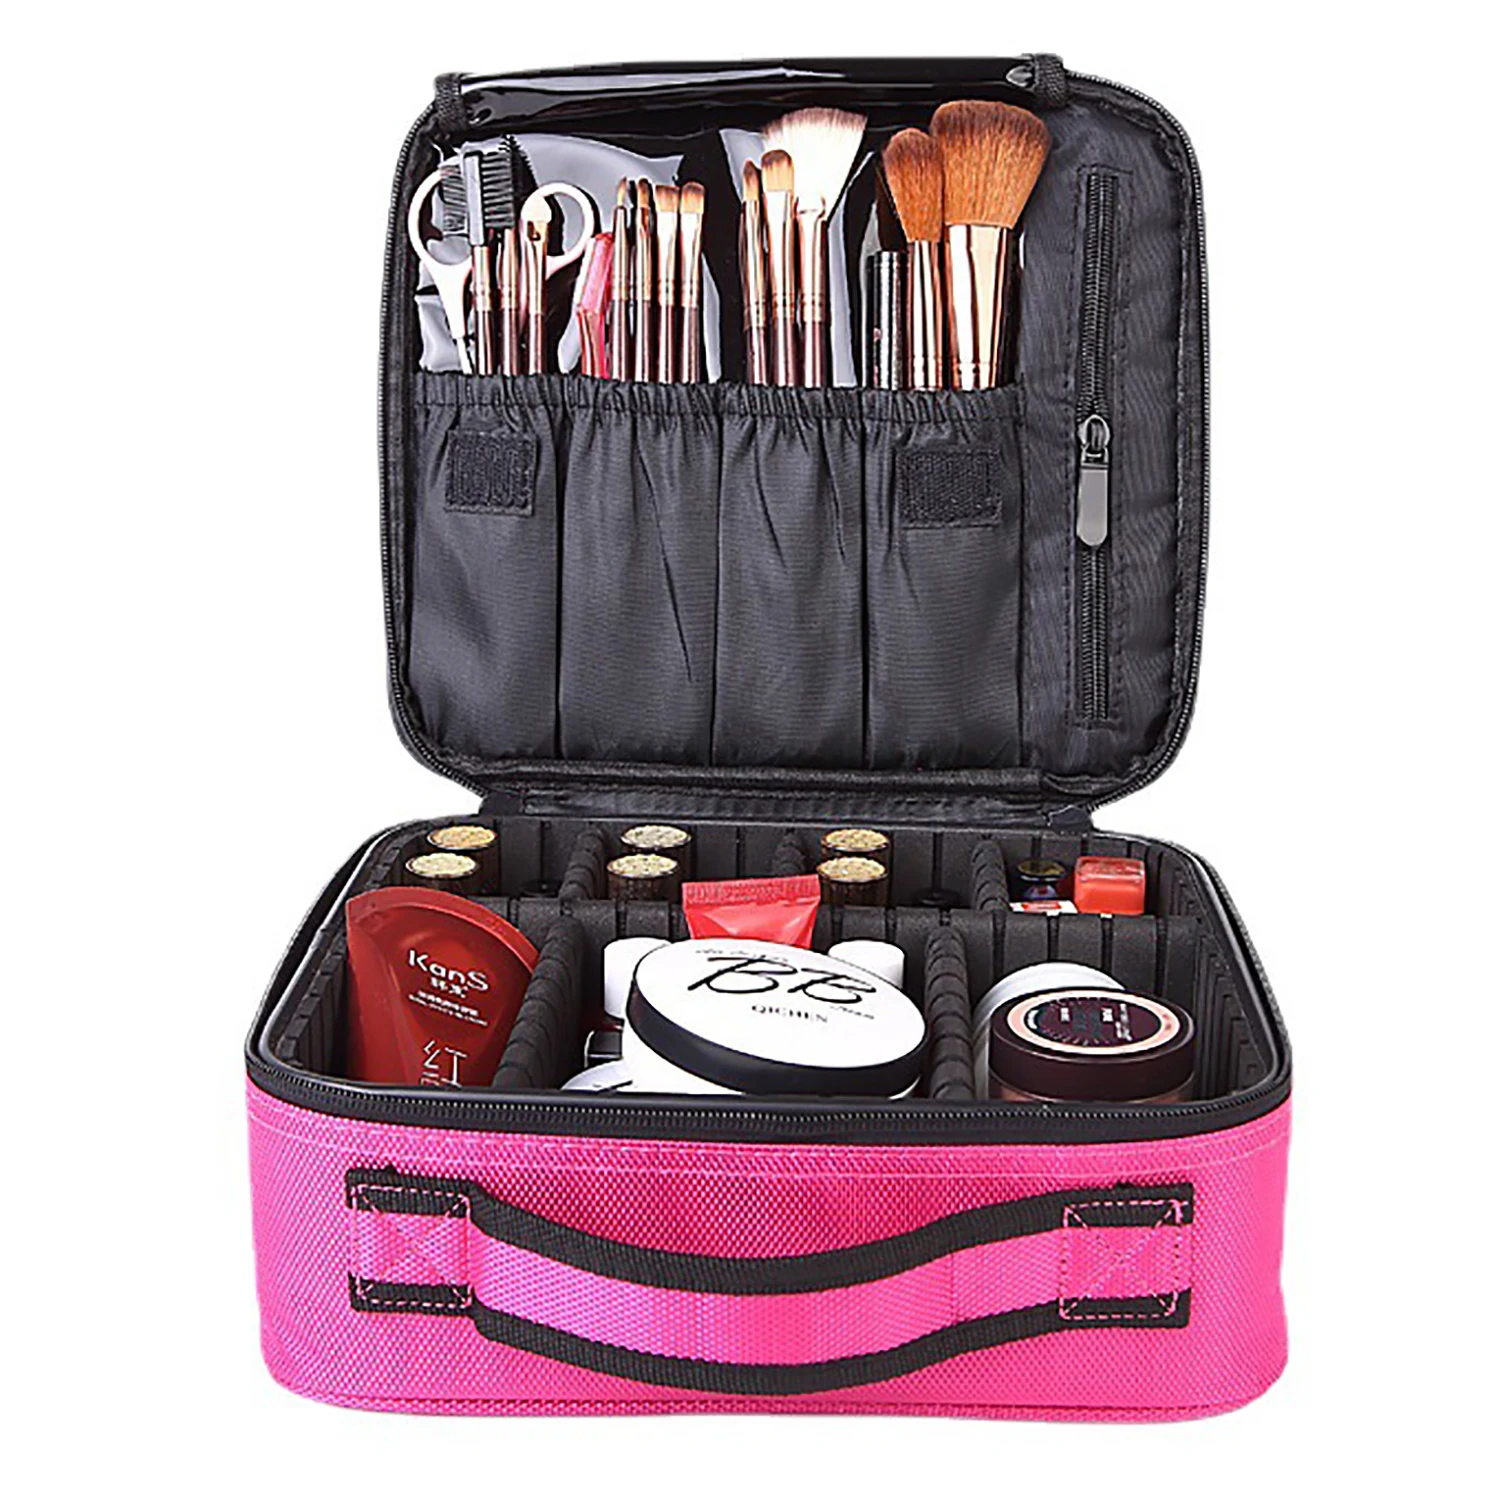 Buy MINNESOTA Multifunctional Makeup Bag, Makeup Organiser Cosmetic Pouch,  Handy Travel Toiletry Pouch, Makeup Storage Bag Case Household Grooming Kit  for Women (Pink) Online at Low Prices in India - Amazon.in